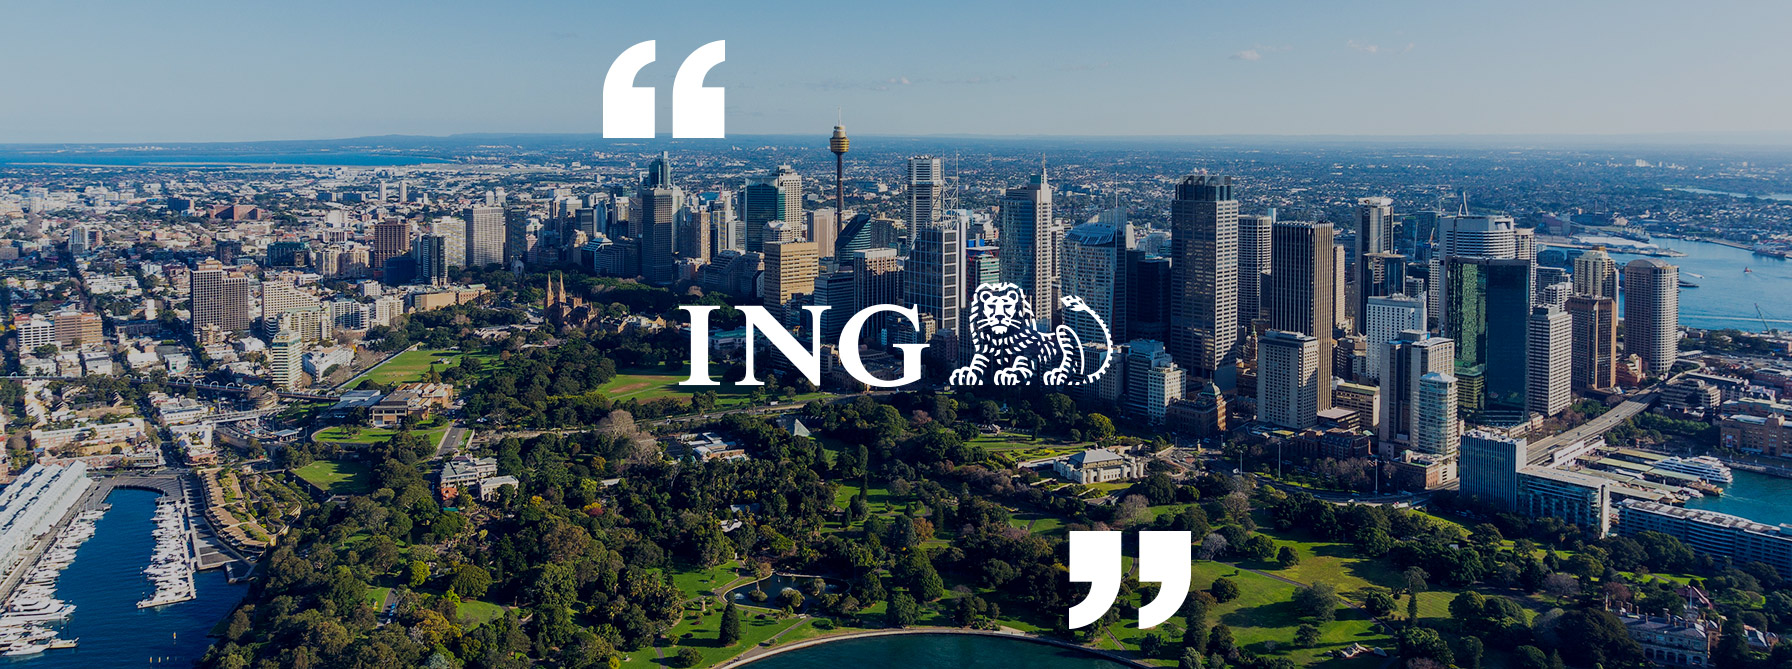 ING Direct Australia talk banking and content in the future